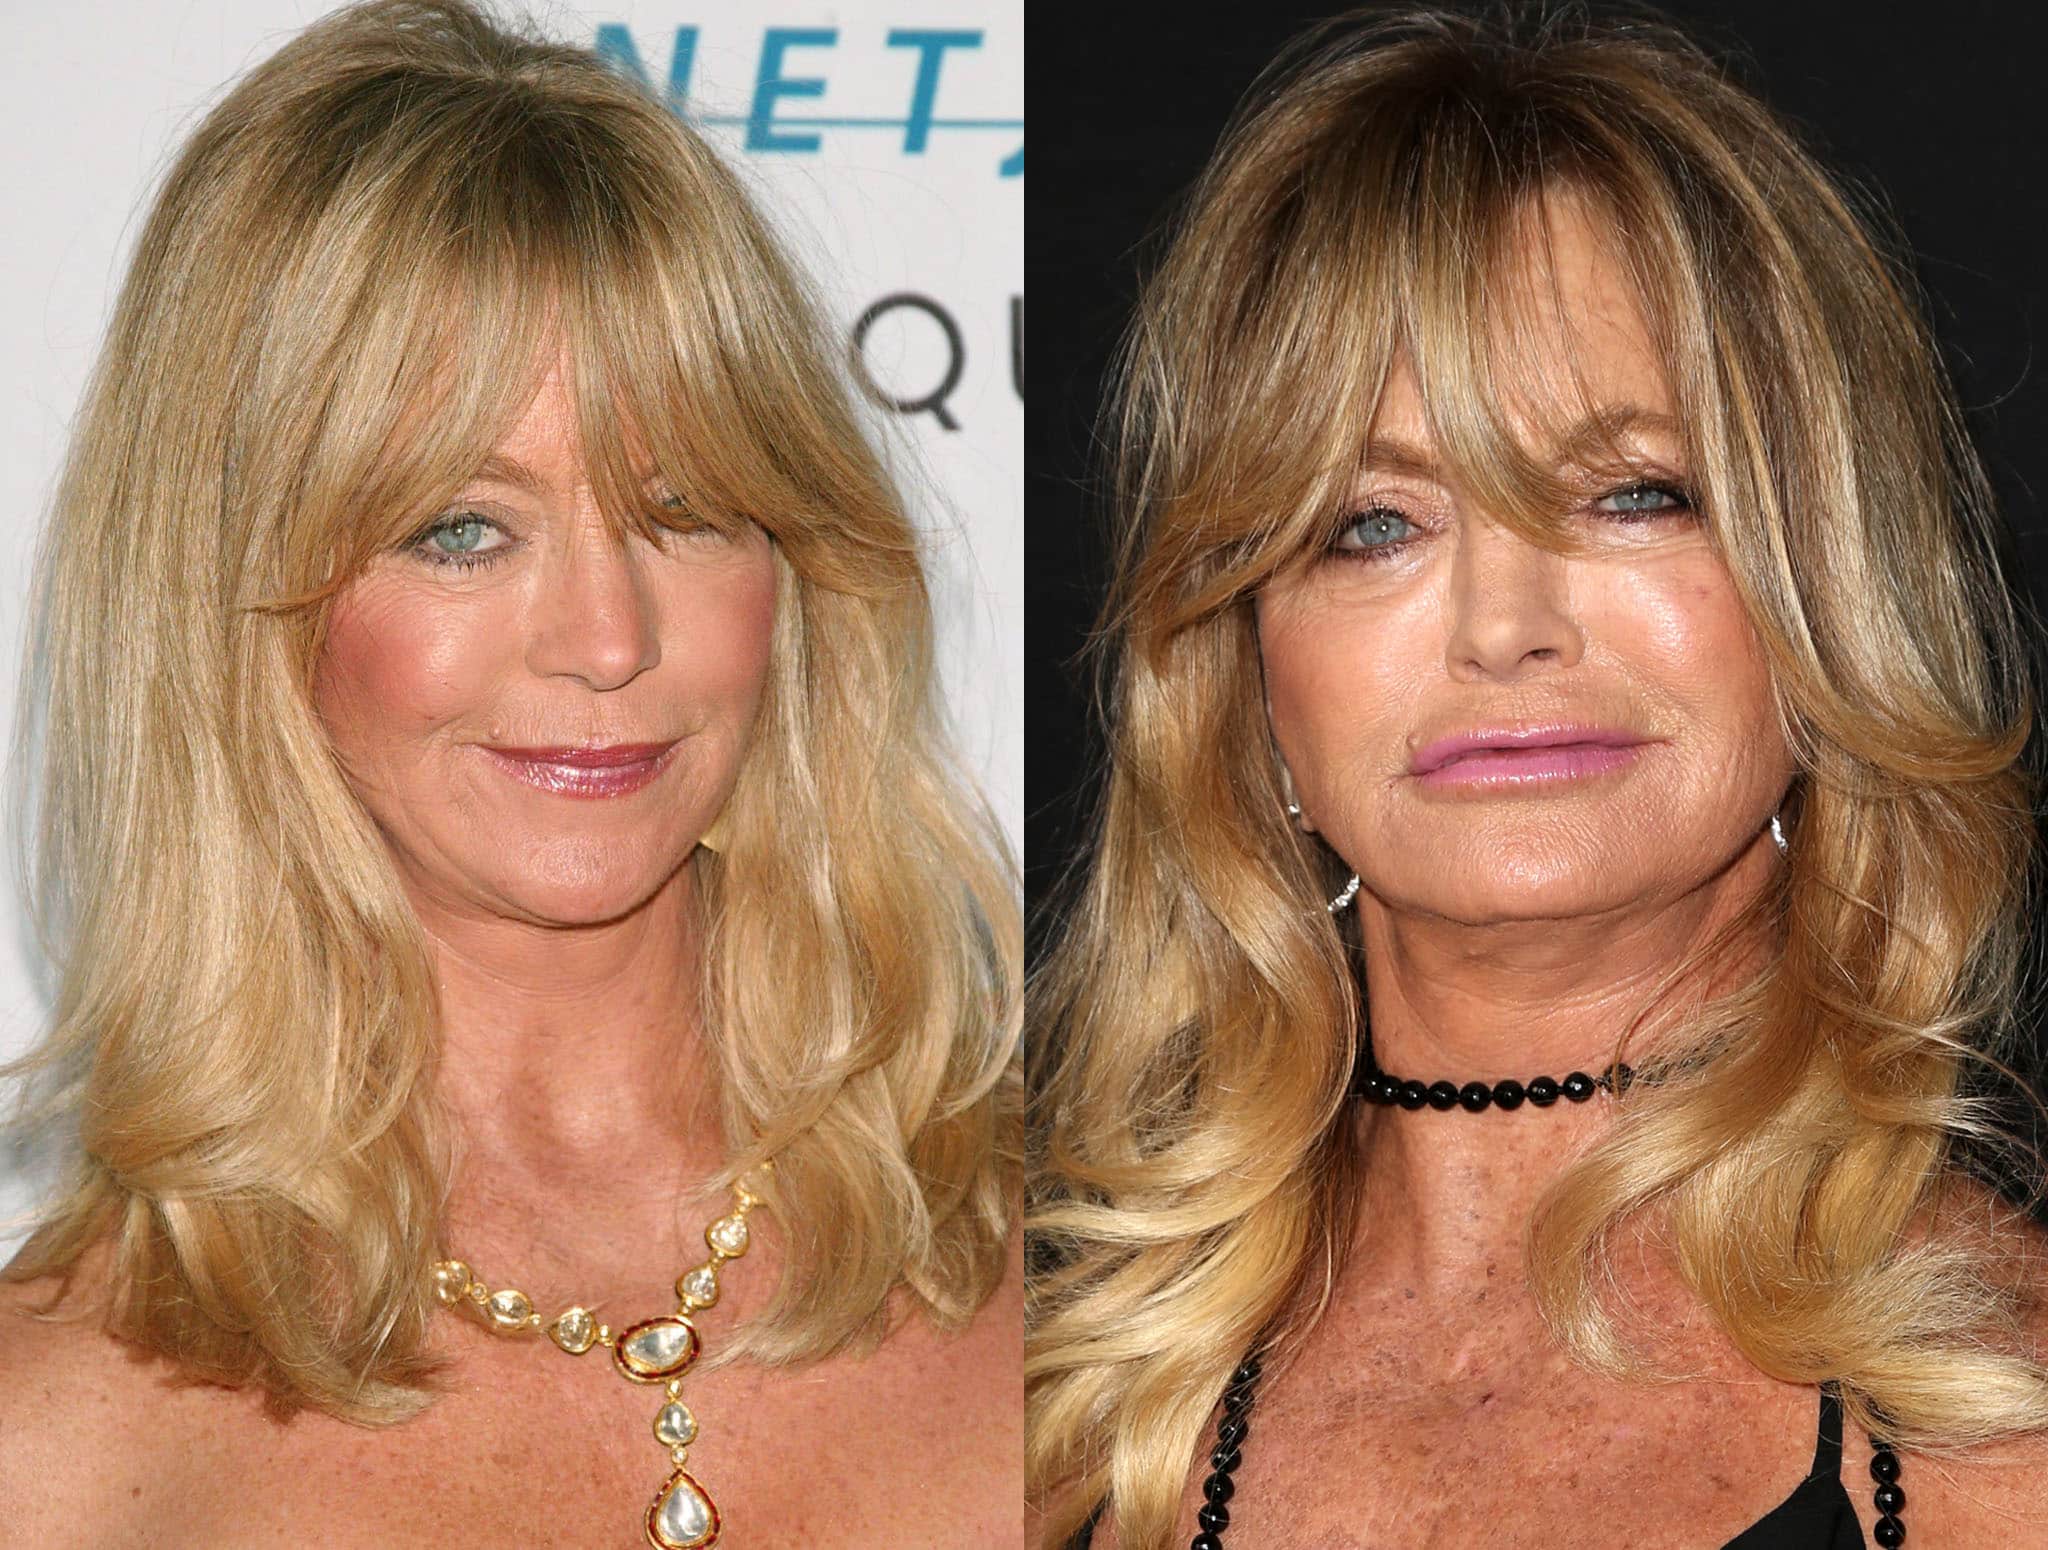 Goldie Hawn before (in 2007) and after (in 2015) plastic surgery rumors